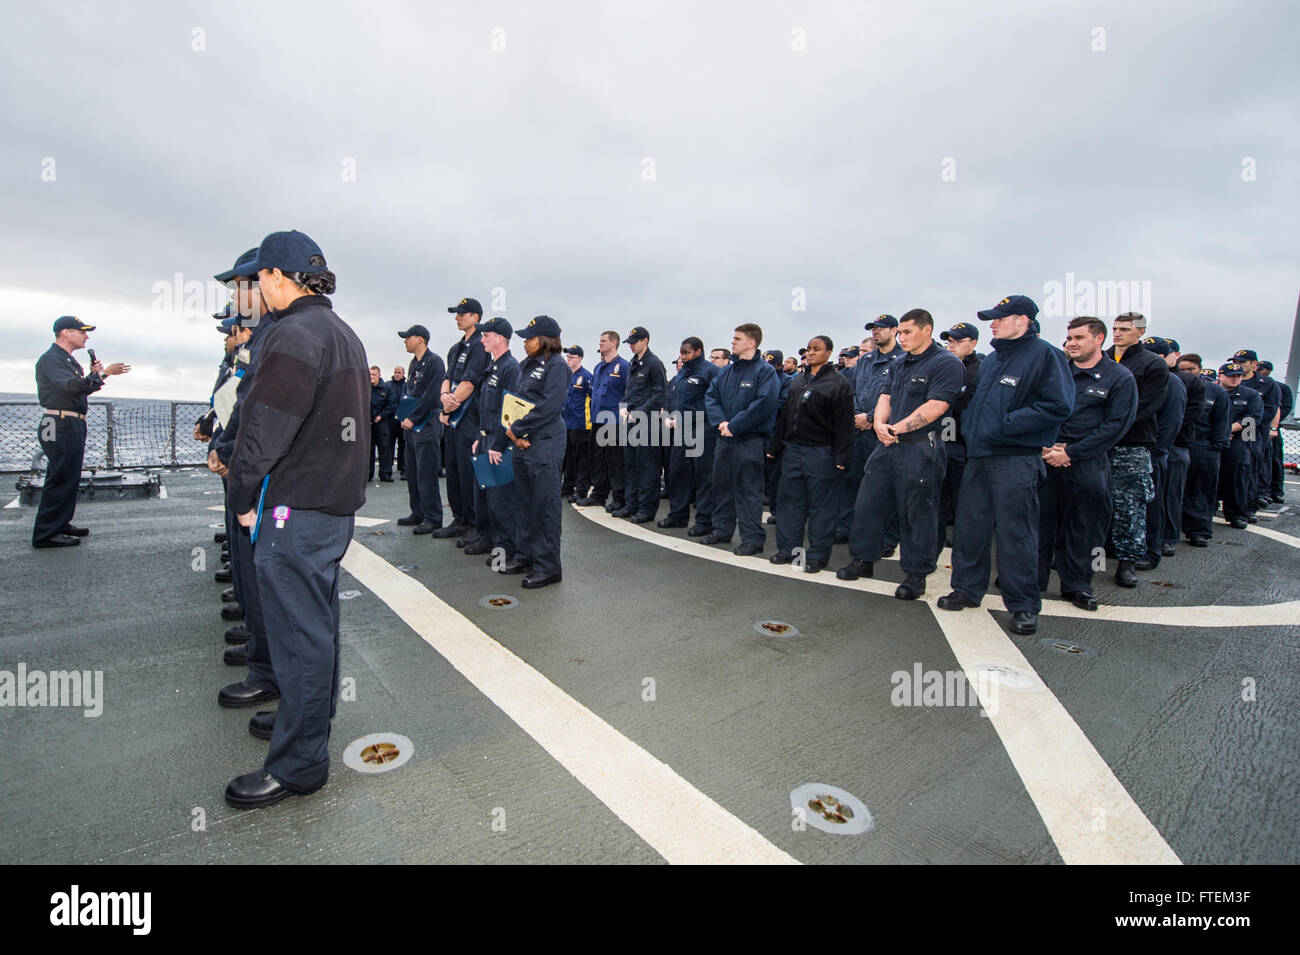 ATLANTIC OCEAN (Feb. 21, 2015) Commanding Officer of USS Laboon (DDG 58), Cmdr. Christopher M. McCallum updates Sailors on upcoming operations during an all-hands call on the flight deck Feb. 21, 2015. Laboon, an Arleigh Burke-class guided-missile destroyer, homeported in Norfolk, is conducting naval operations in the U.S. 6th Fleet area of operations in support of U.S. national security interests in Europe. Stock Photo